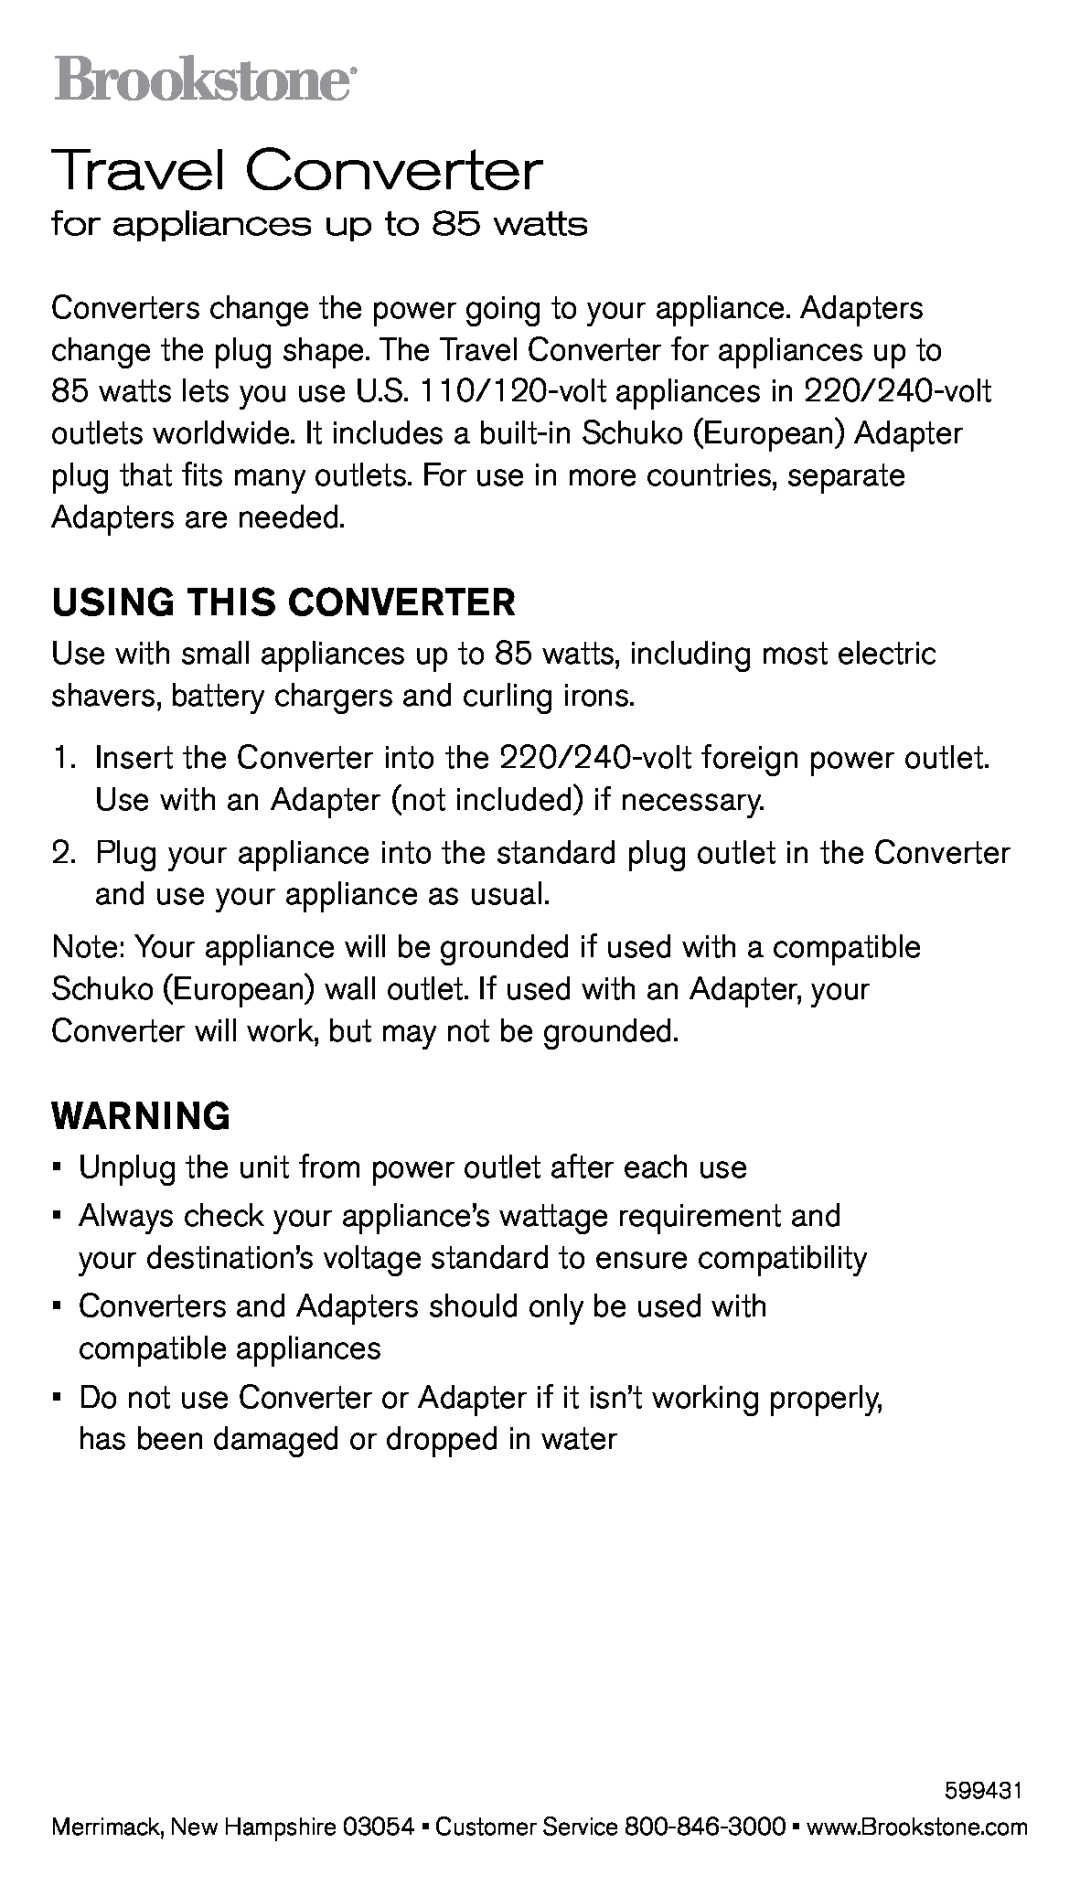 Brookstone 599431 manual Travel Converter, Using this converter, for appliances up to 85 watts 